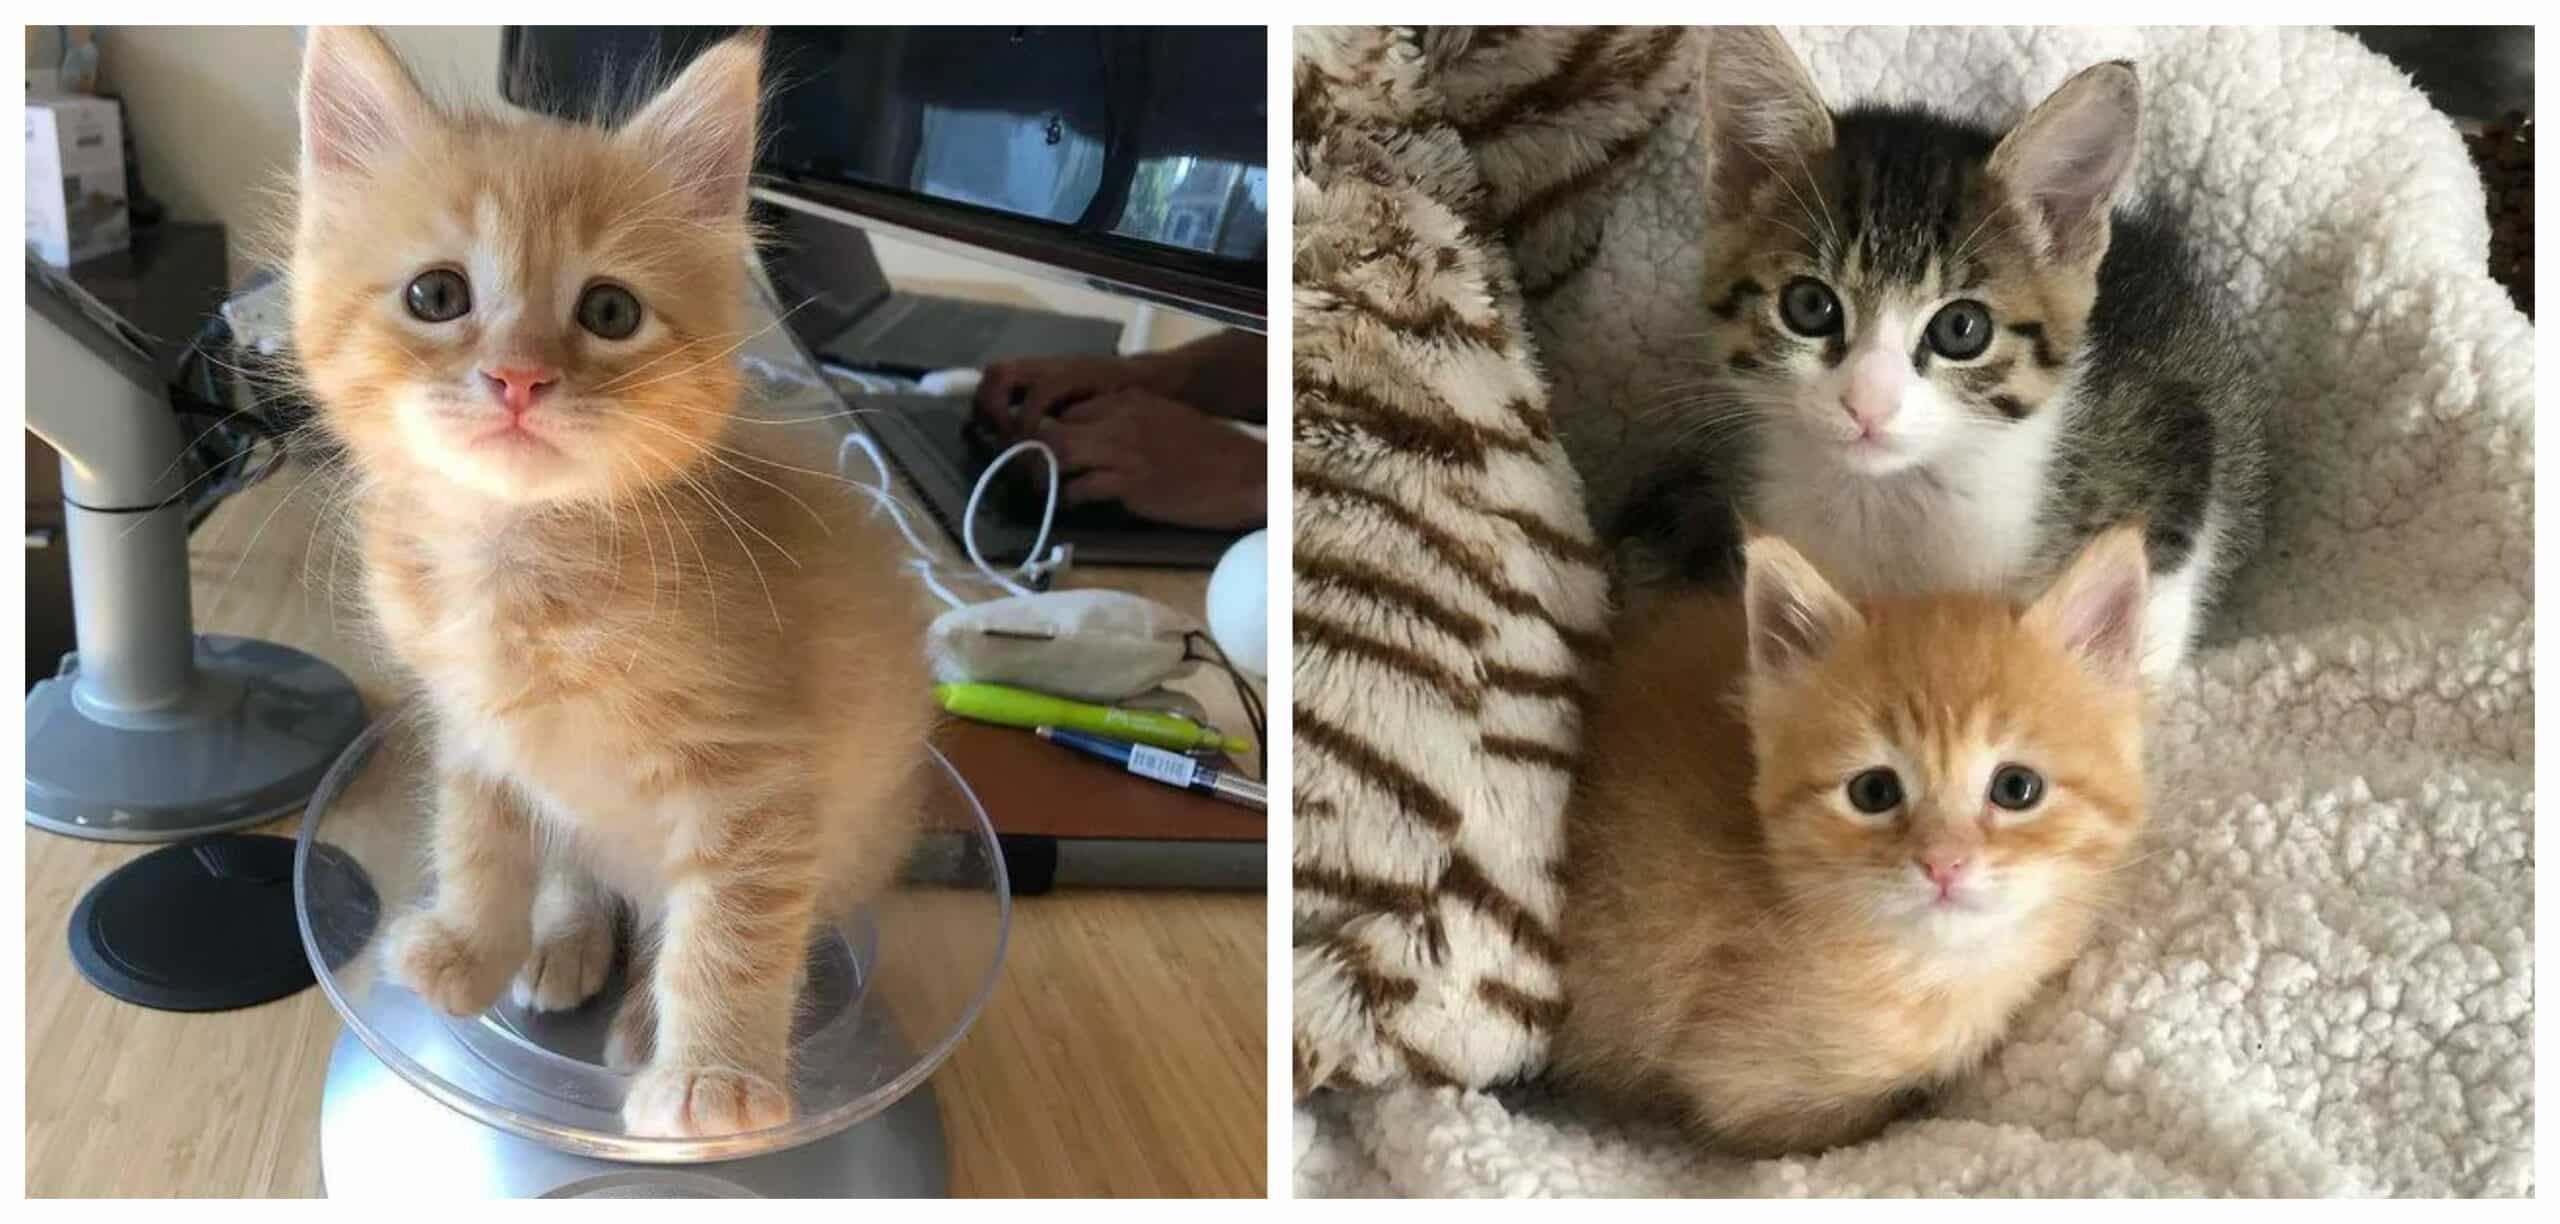 Two kittens were found separately meets up one day and grew close